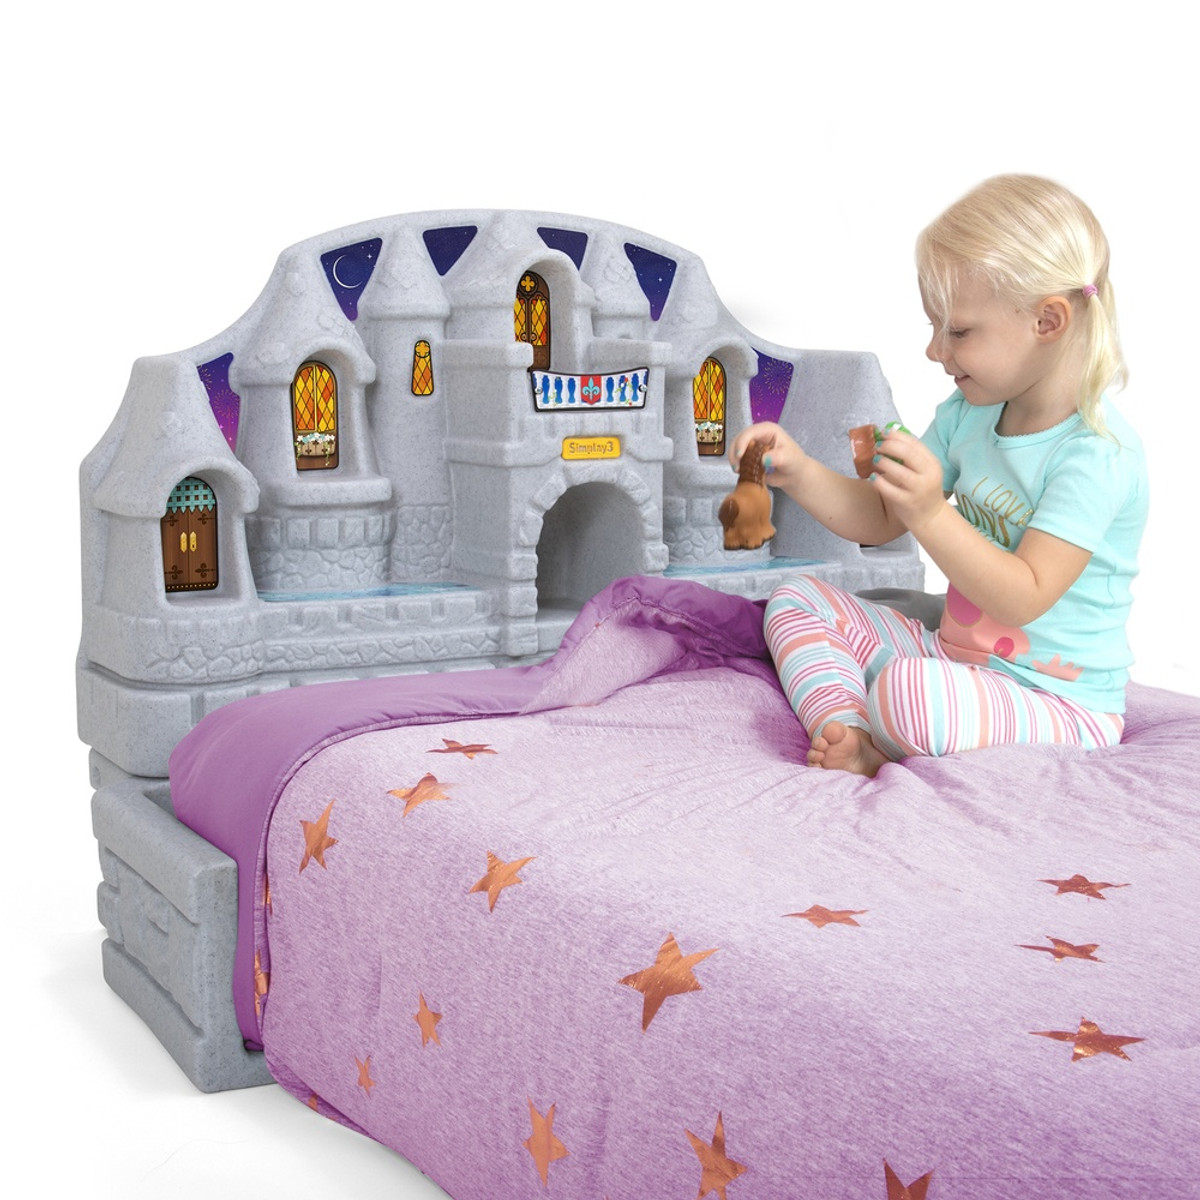 Simplay3 Imagination Castle Headboard positioned on floor with girl playing